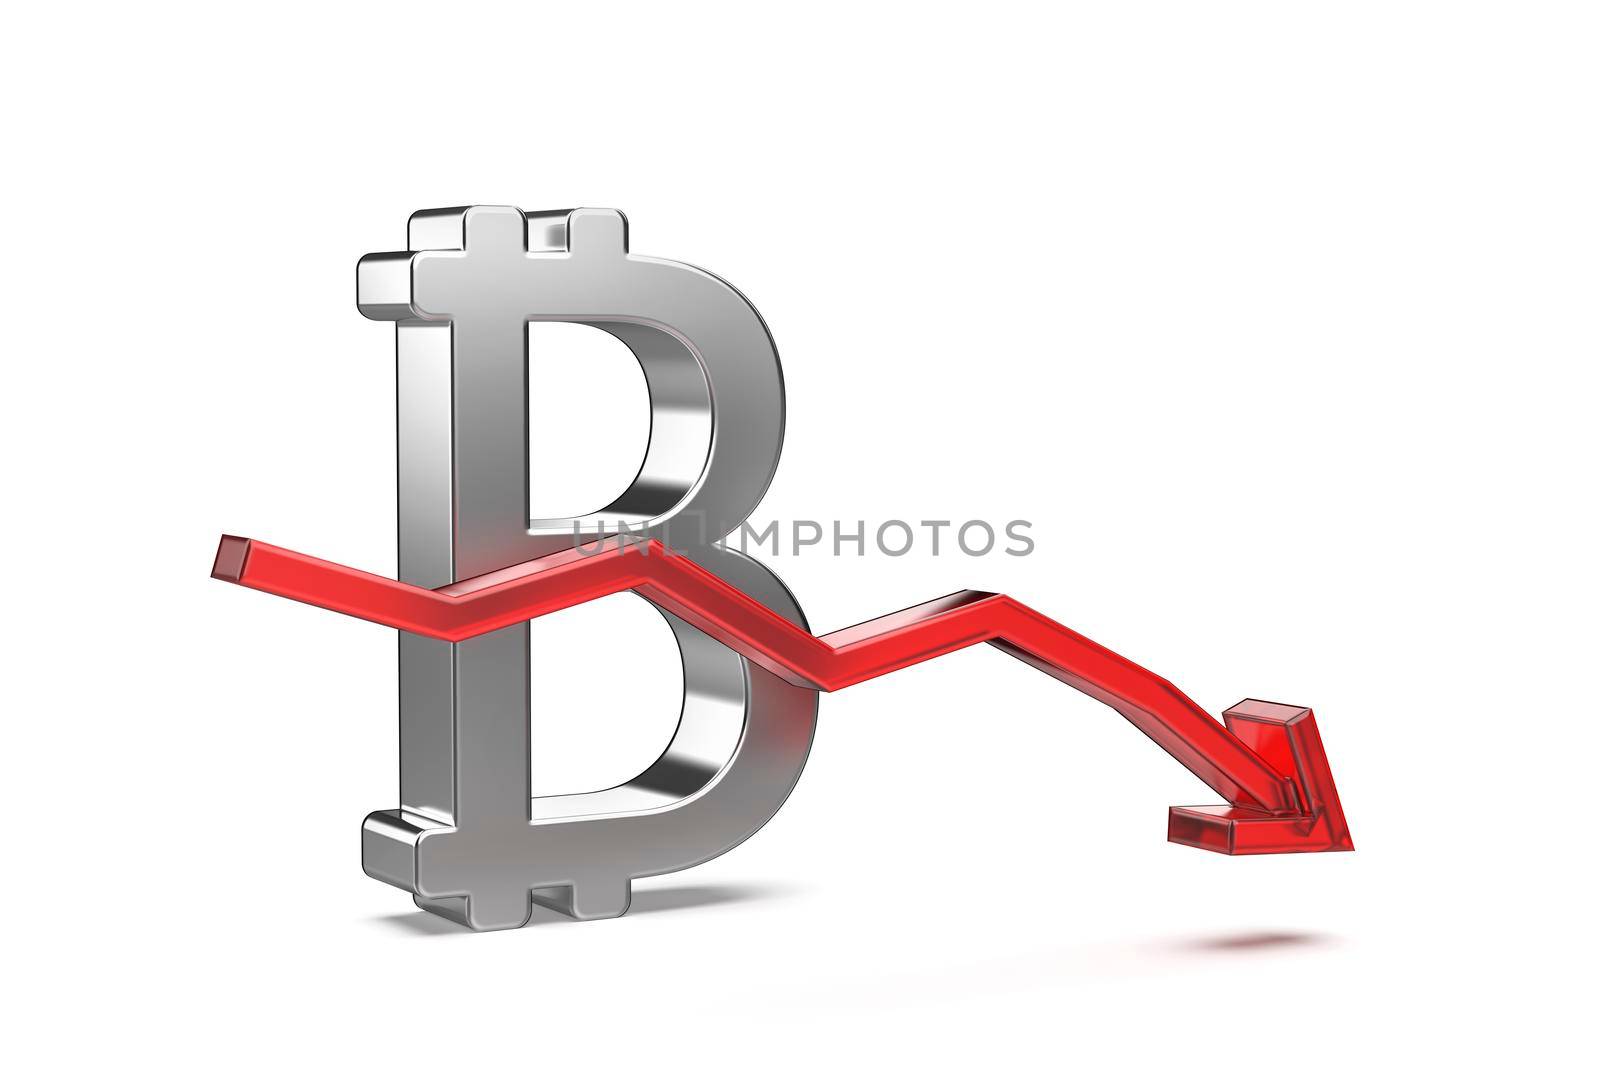 Decreasing the value of Bitcoin cryptocurrency, concept image